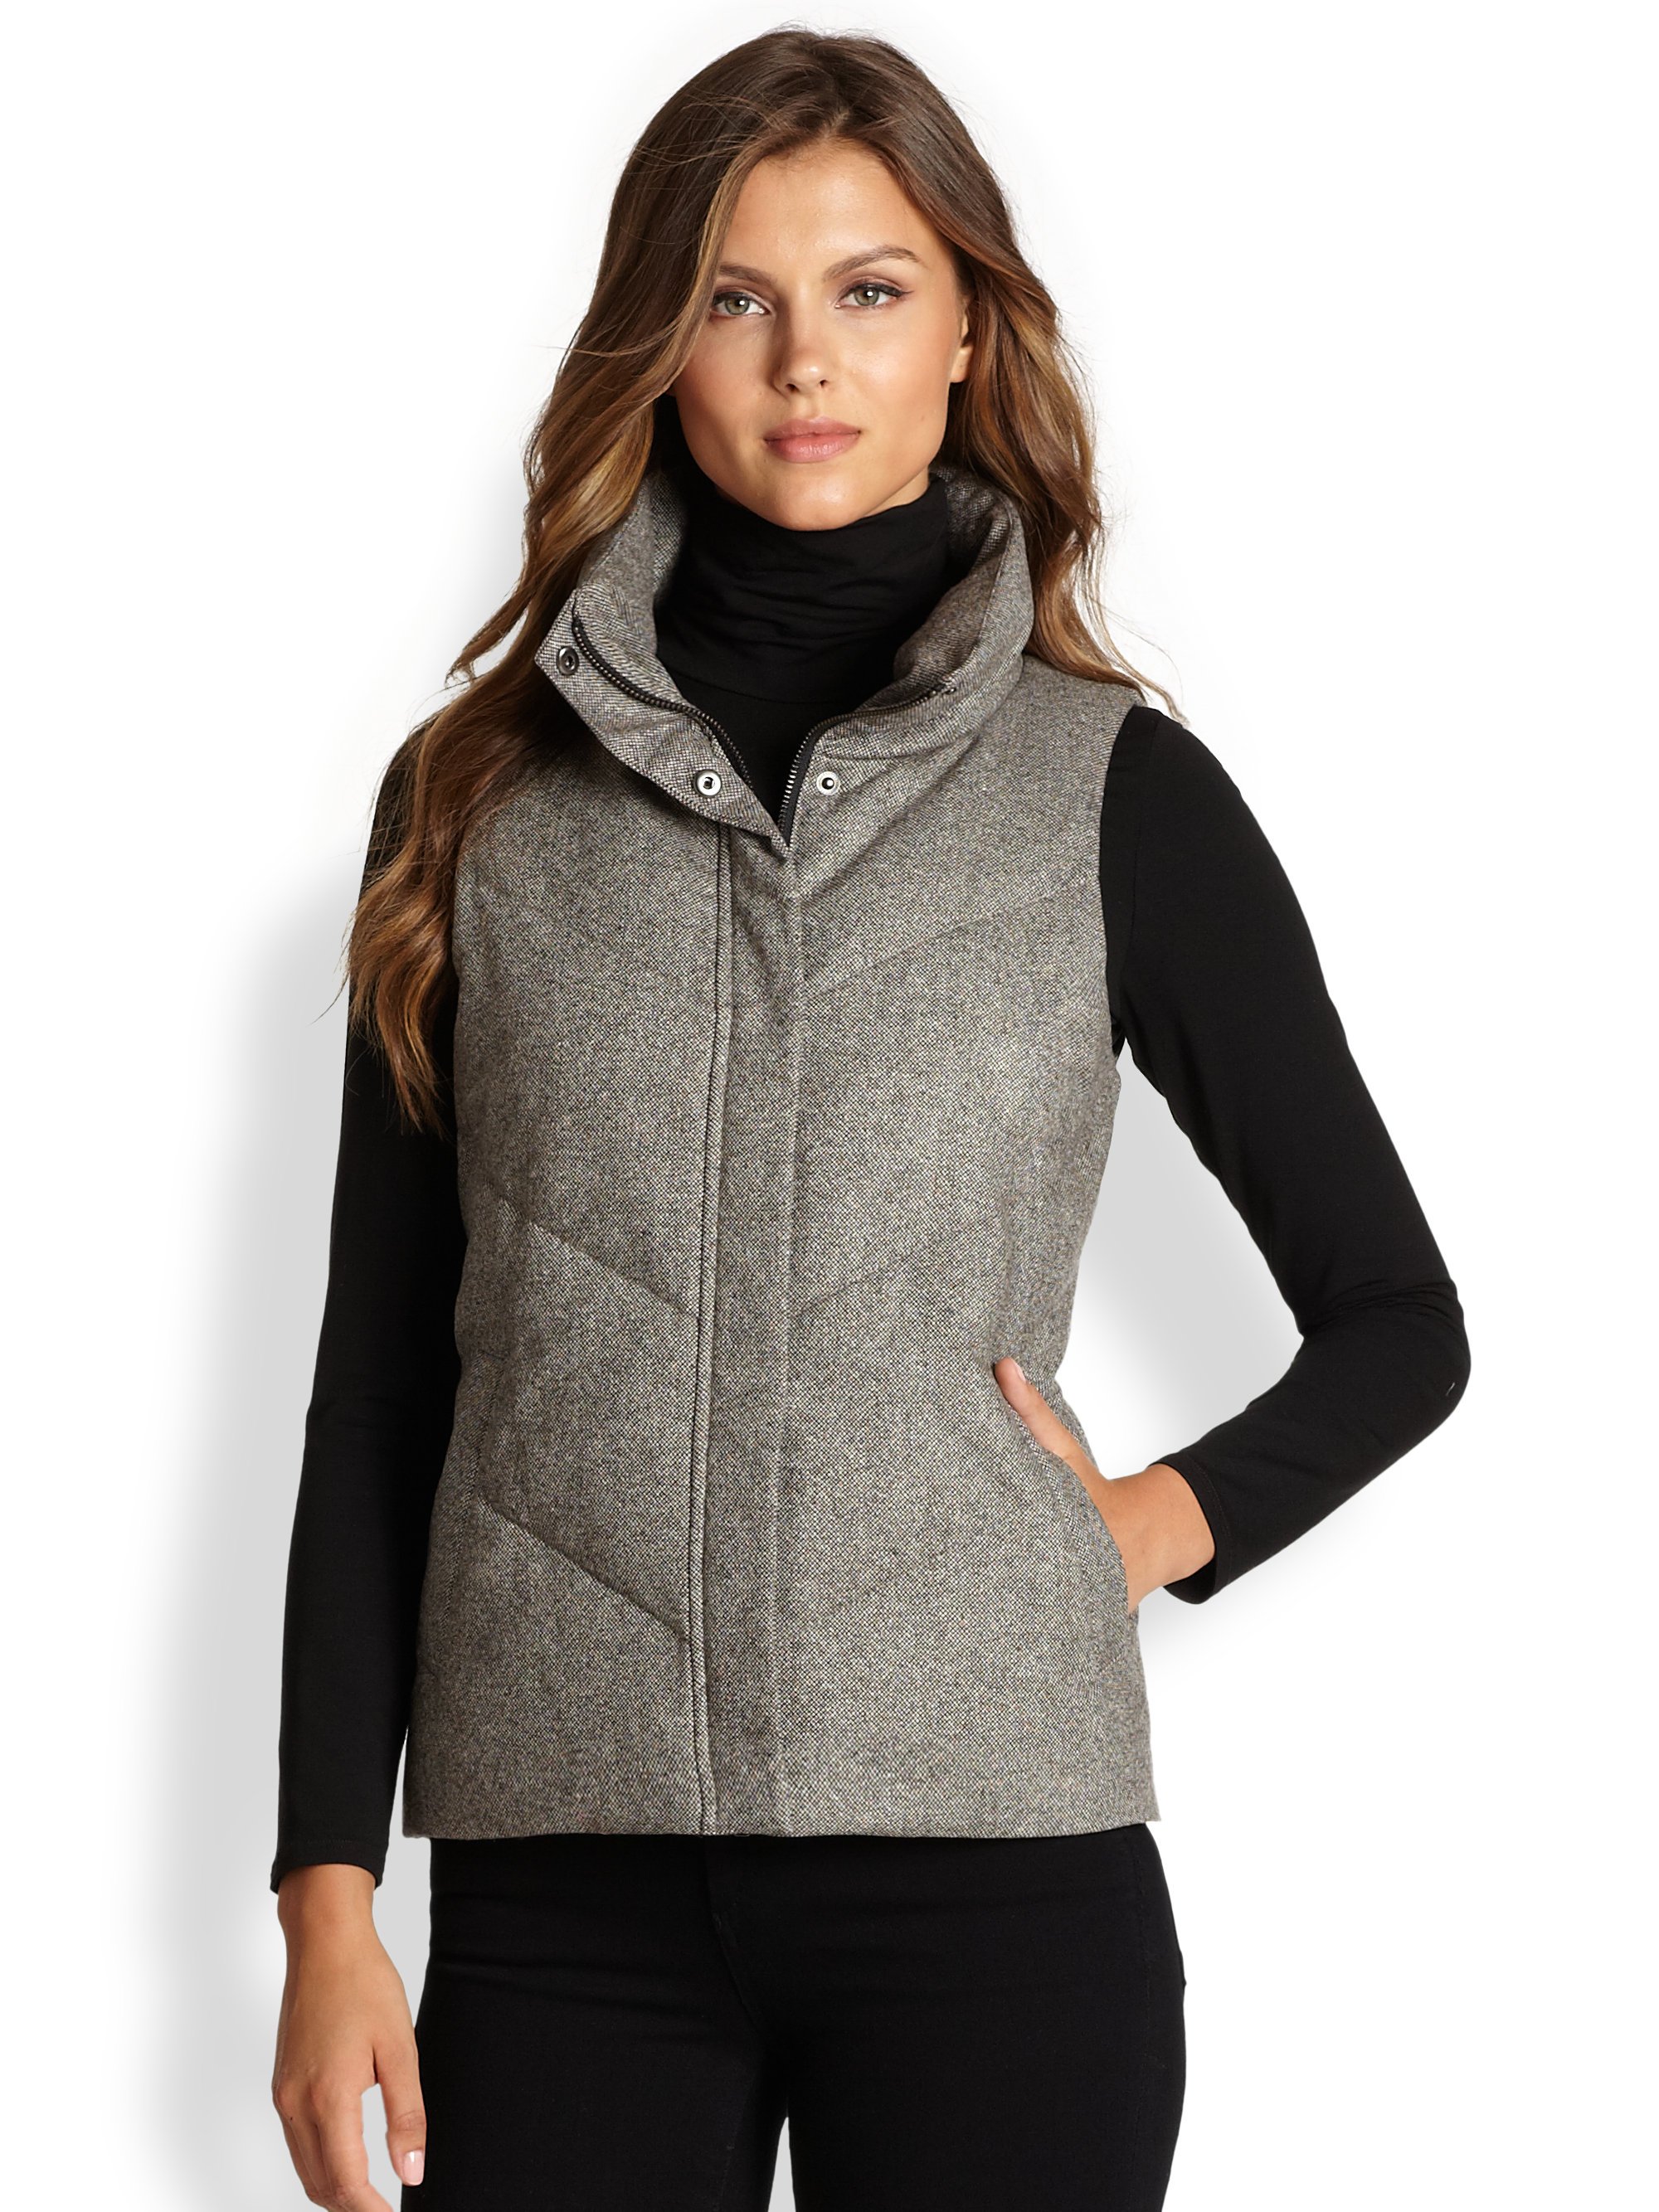 The Ultimate Guide to Styling Your Puffer Vest: Stay Fashionable and Warm All Winter Long